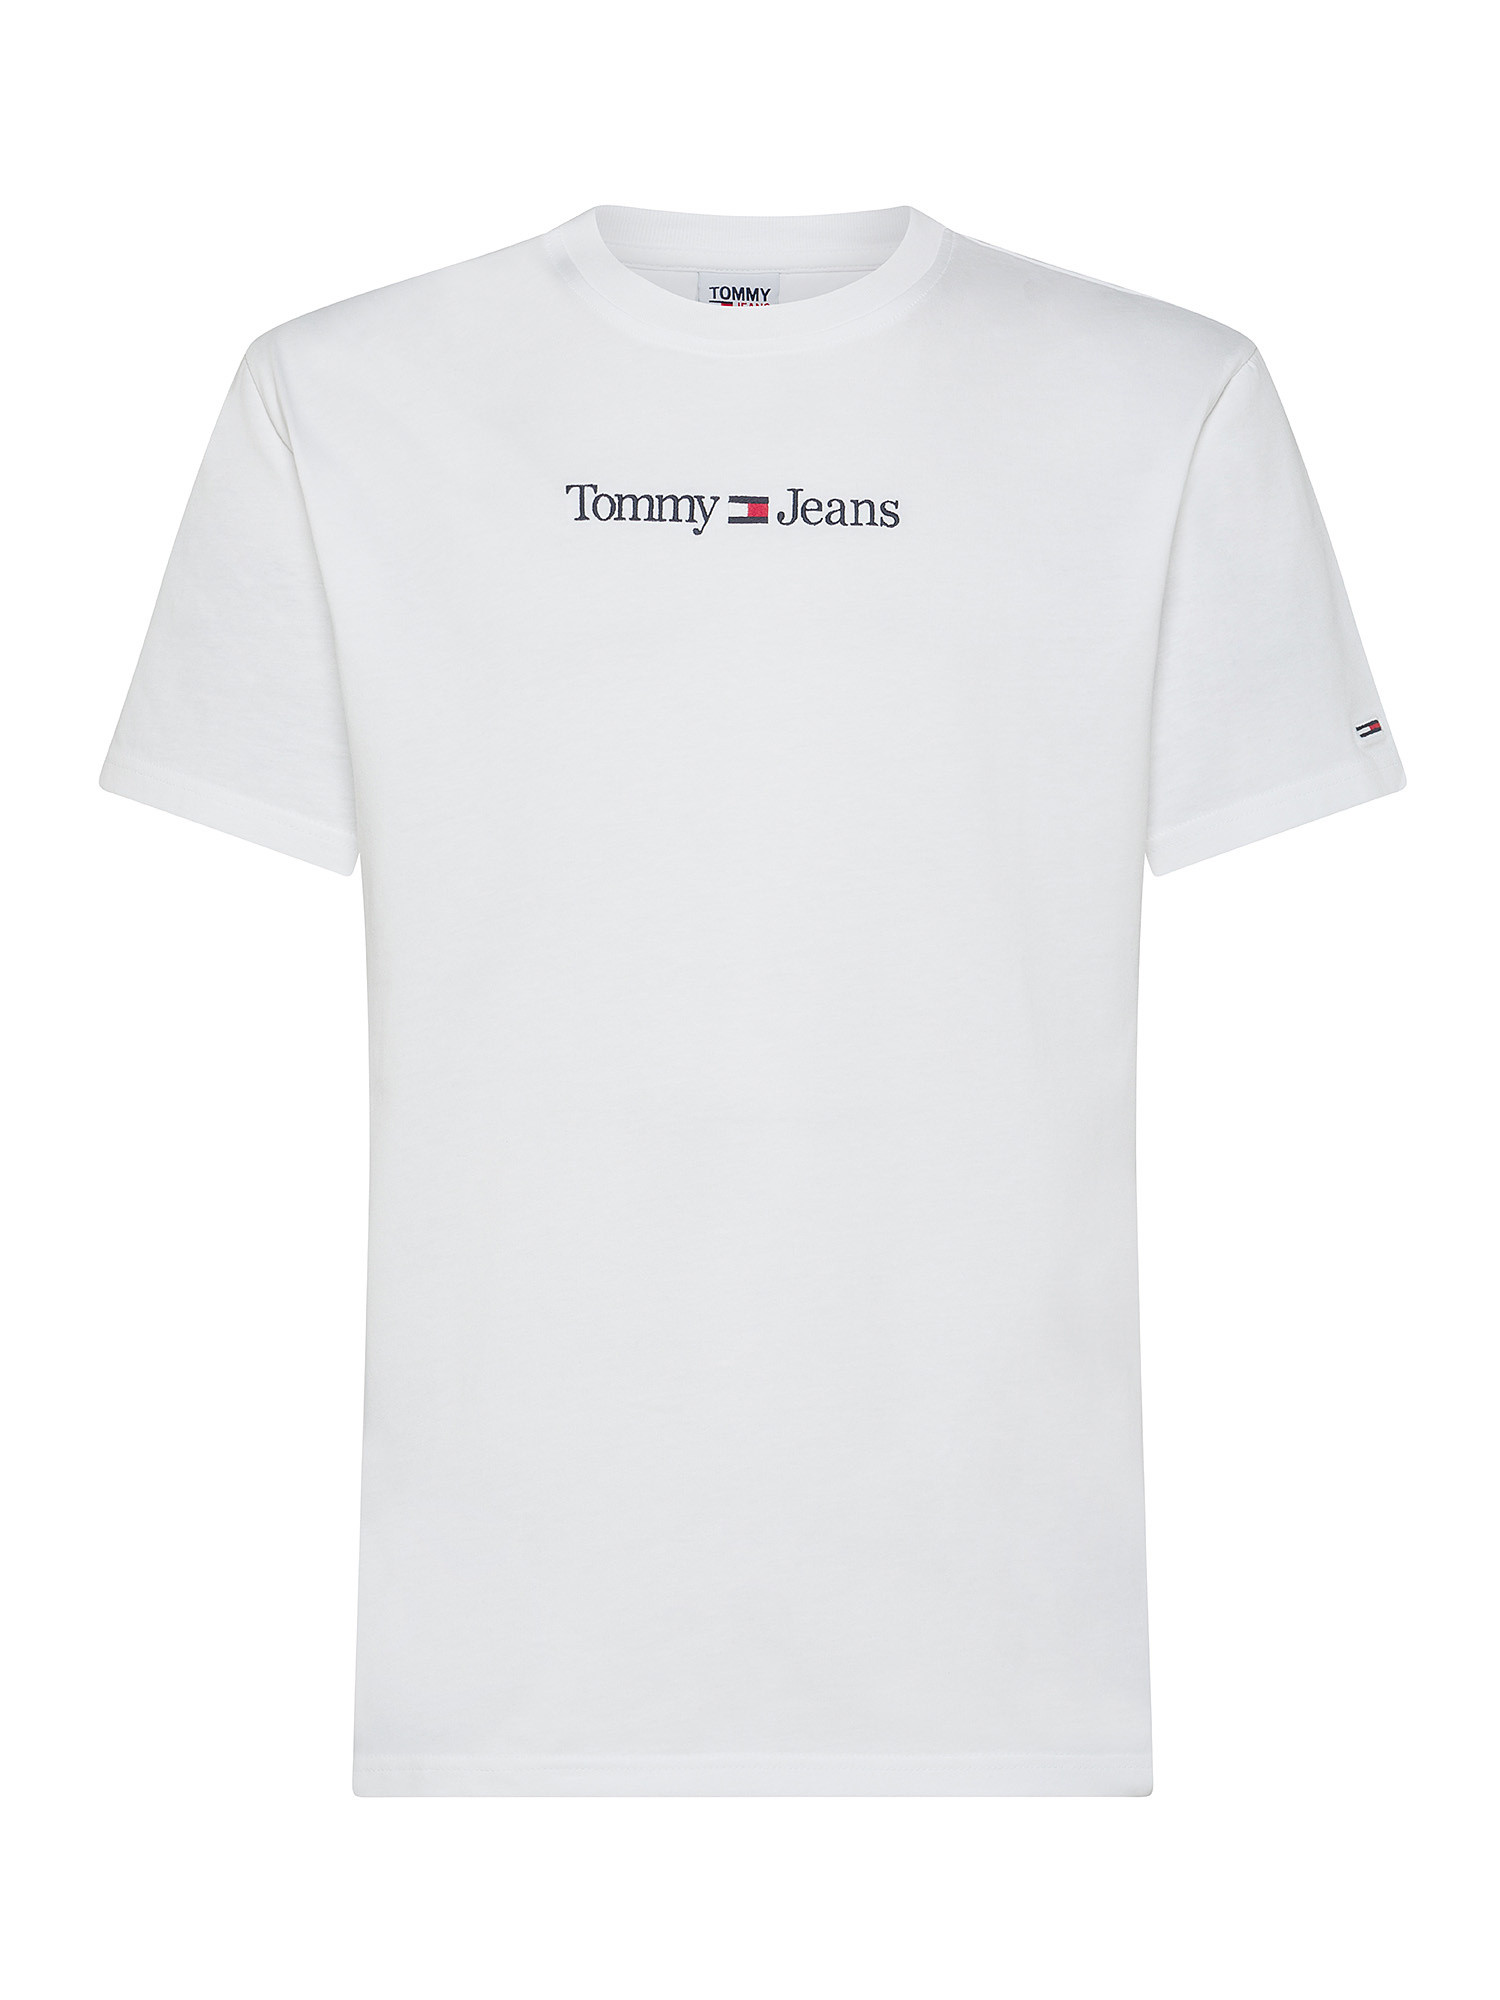 Tommy Jeans - T-shirt girocollo in cotone con logo ricamato, Bianco, large image number 0